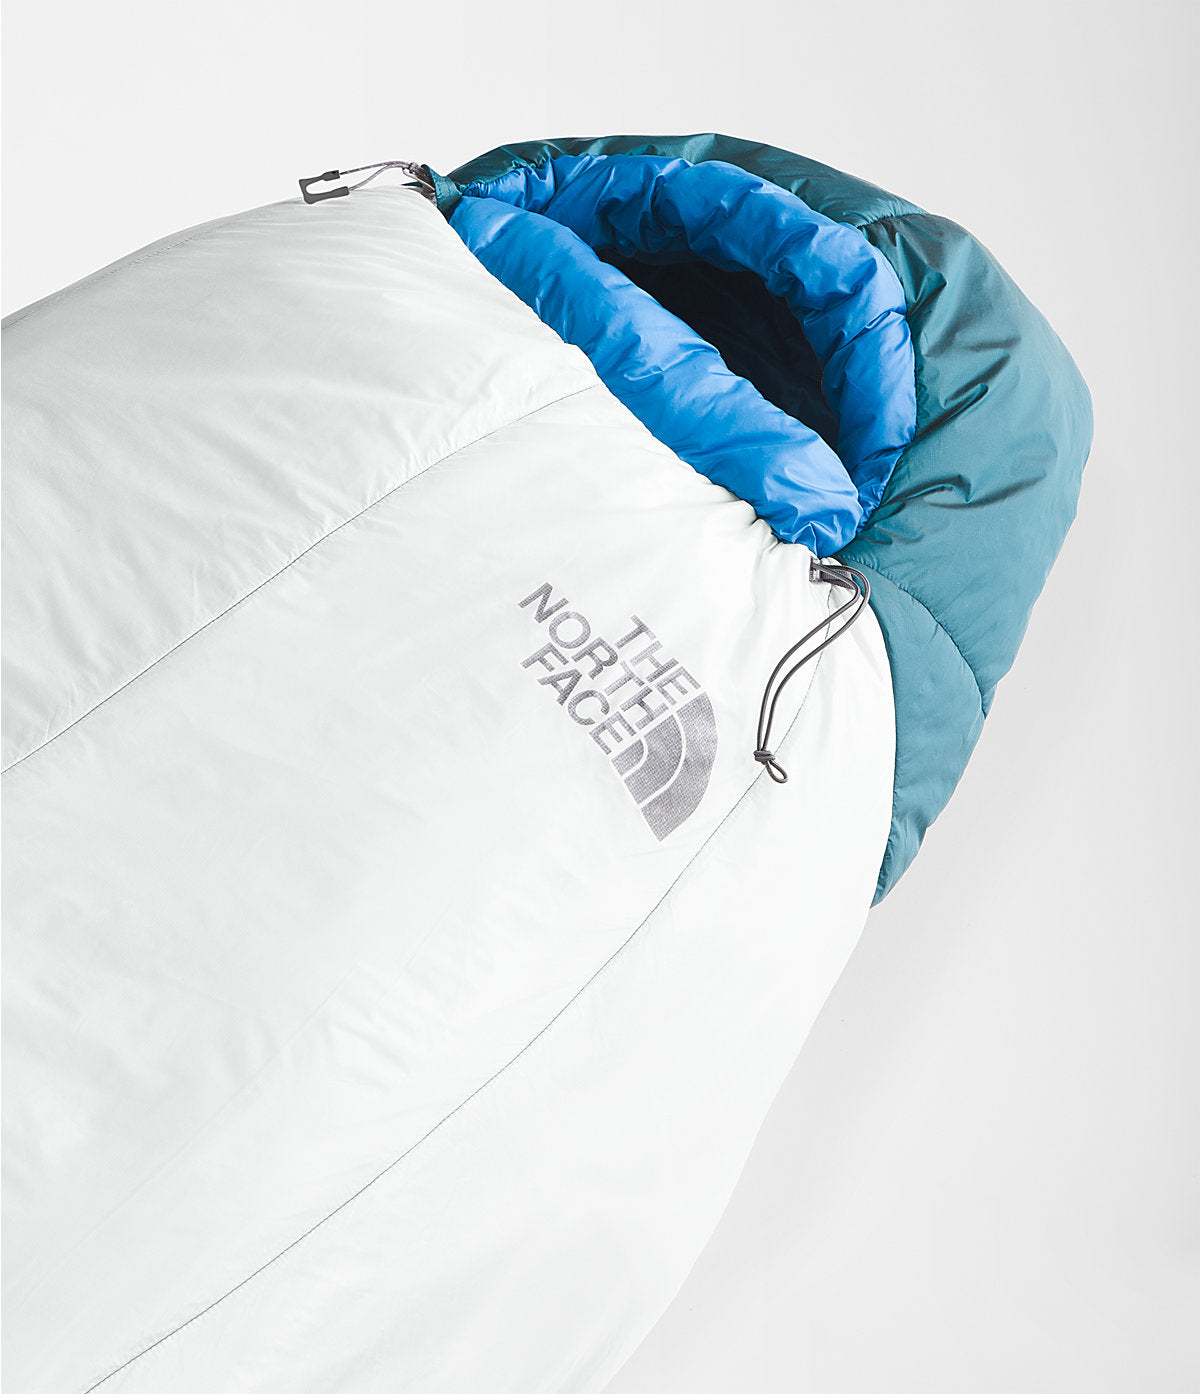 The North Face Cat’s Meow Sleeping Bag